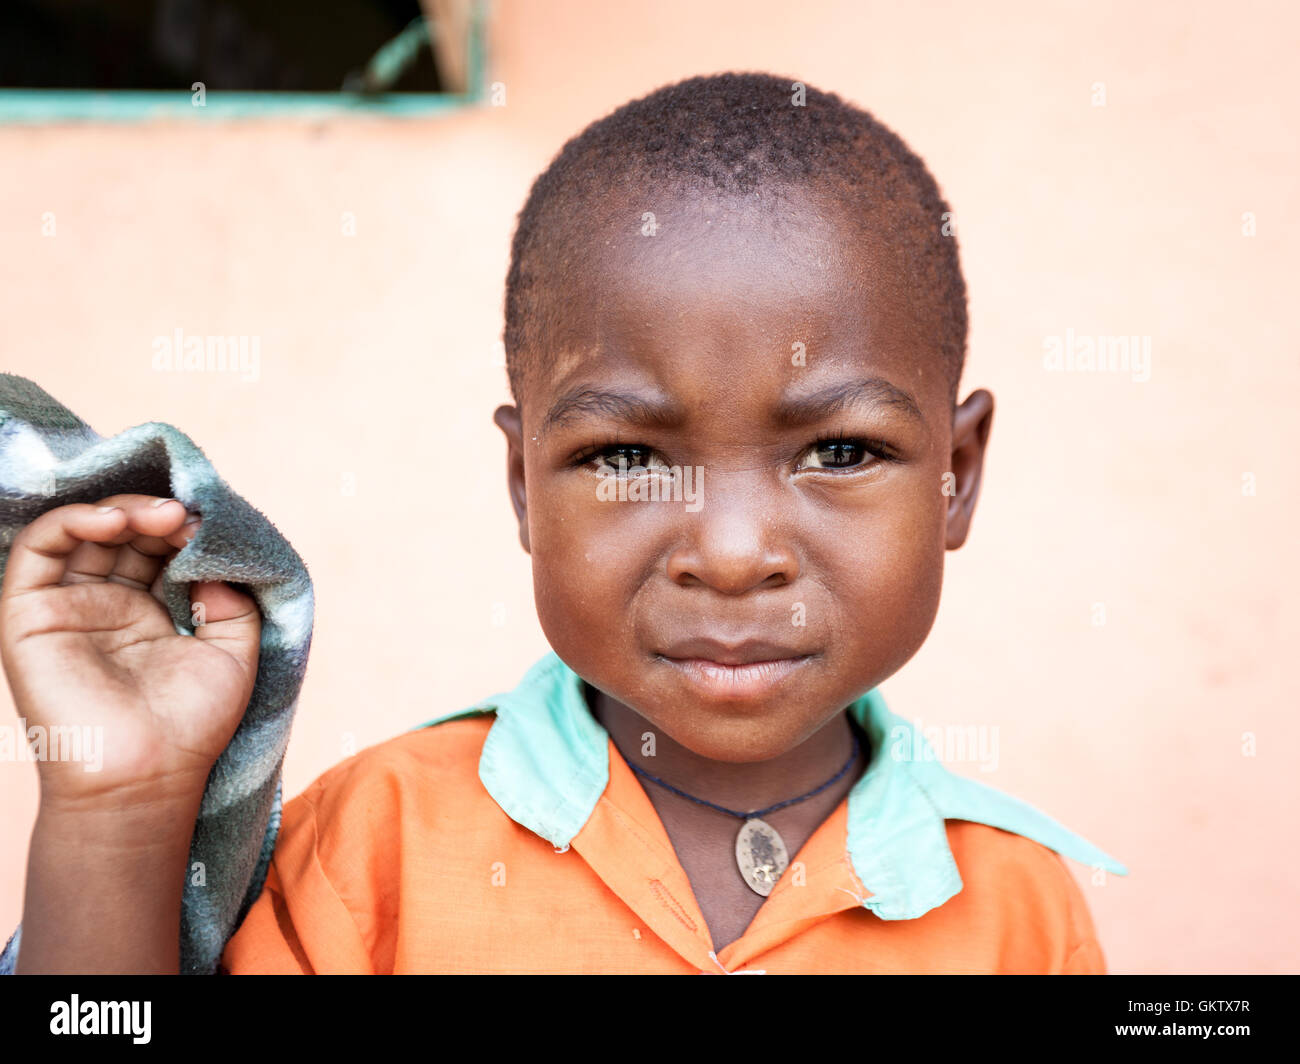 A young boy at a school in Uganda Stock Photo